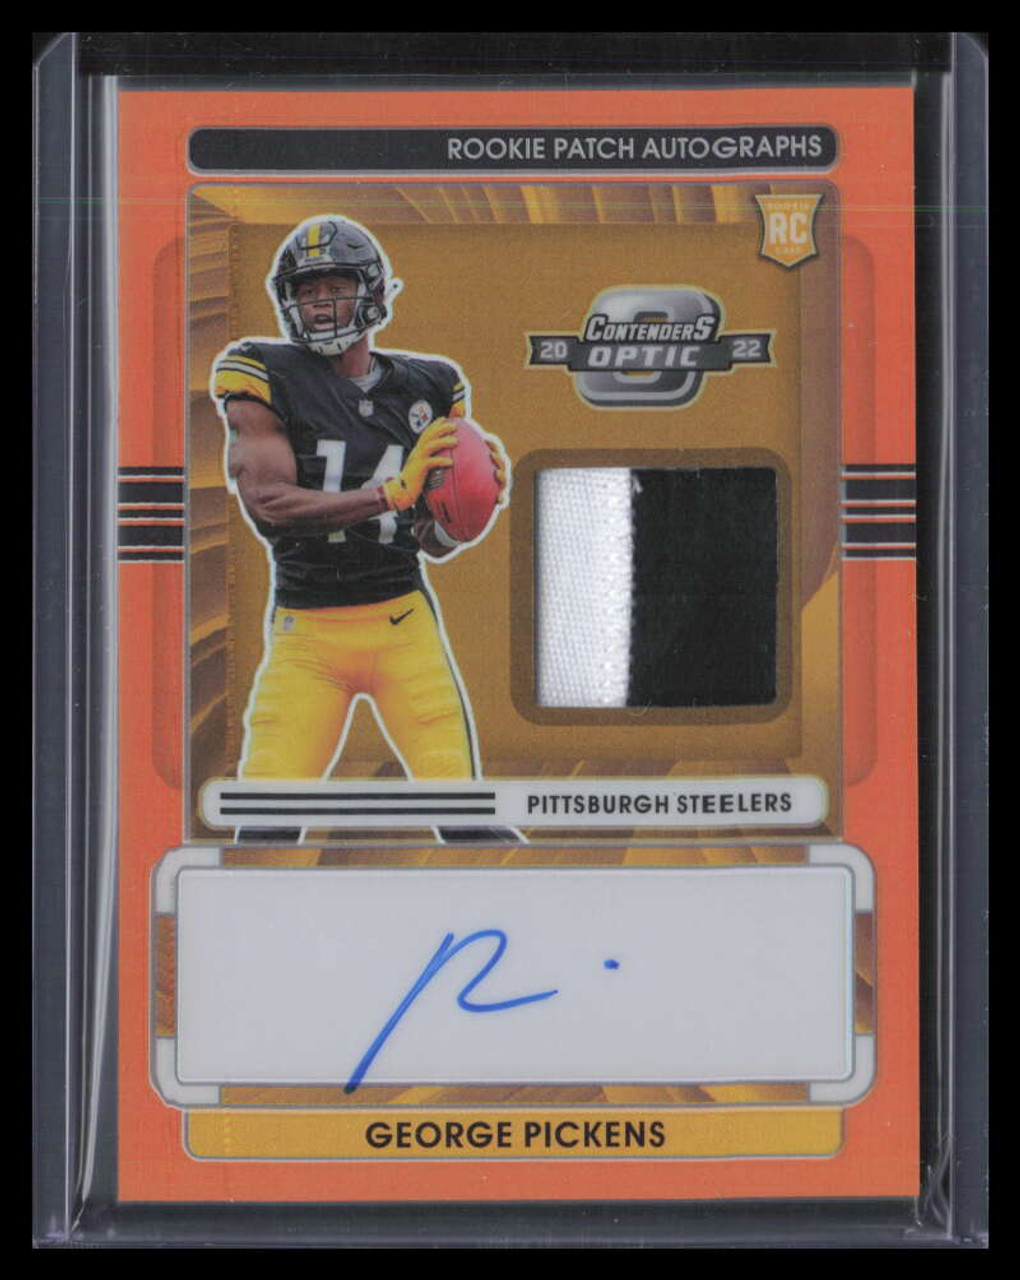 2022 Panini Contenders Optic Autographs George Pickens Rookie Patch Auto  19/25 - Sportsnut Cards